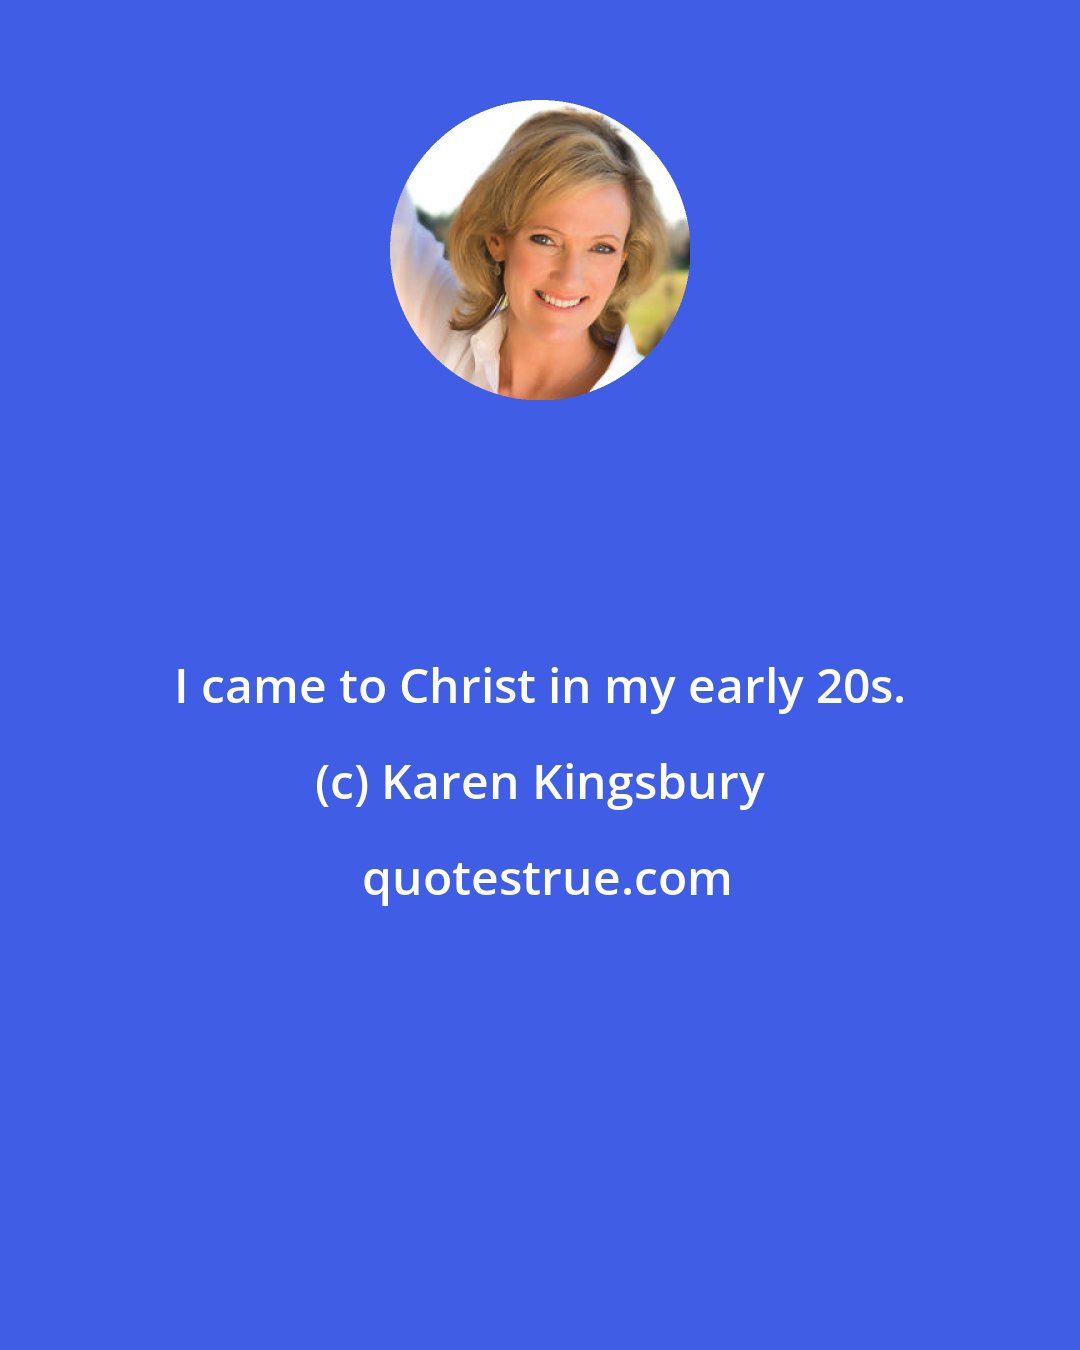 Karen Kingsbury: I came to Christ in my early 20s.